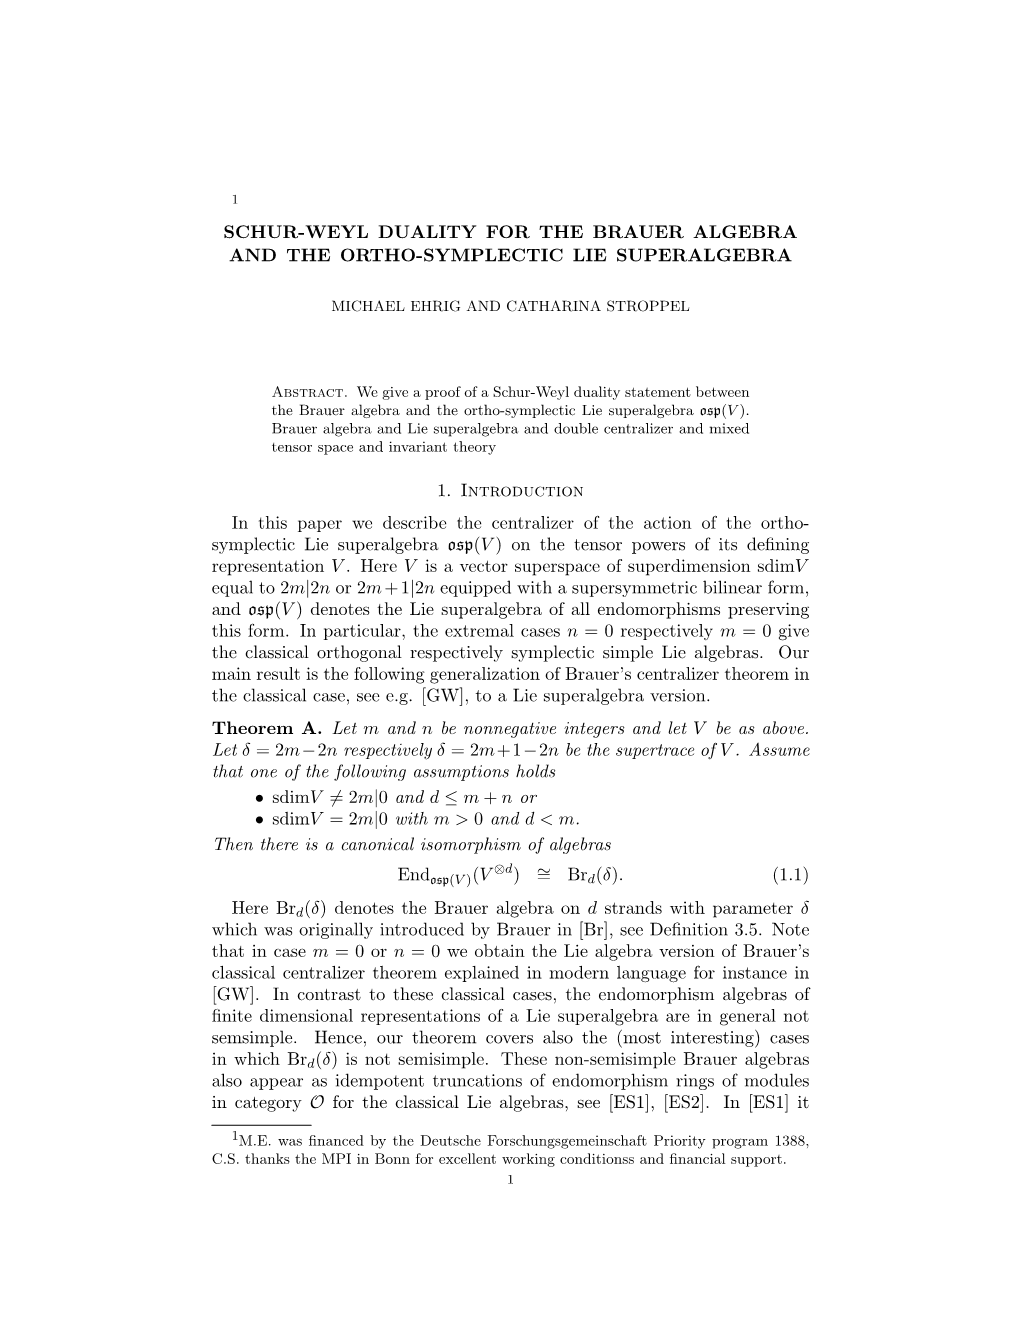 Schur-Weyl Duality for the Brauer Algebra and the Ortho-Symplectic Lie Superalgebra